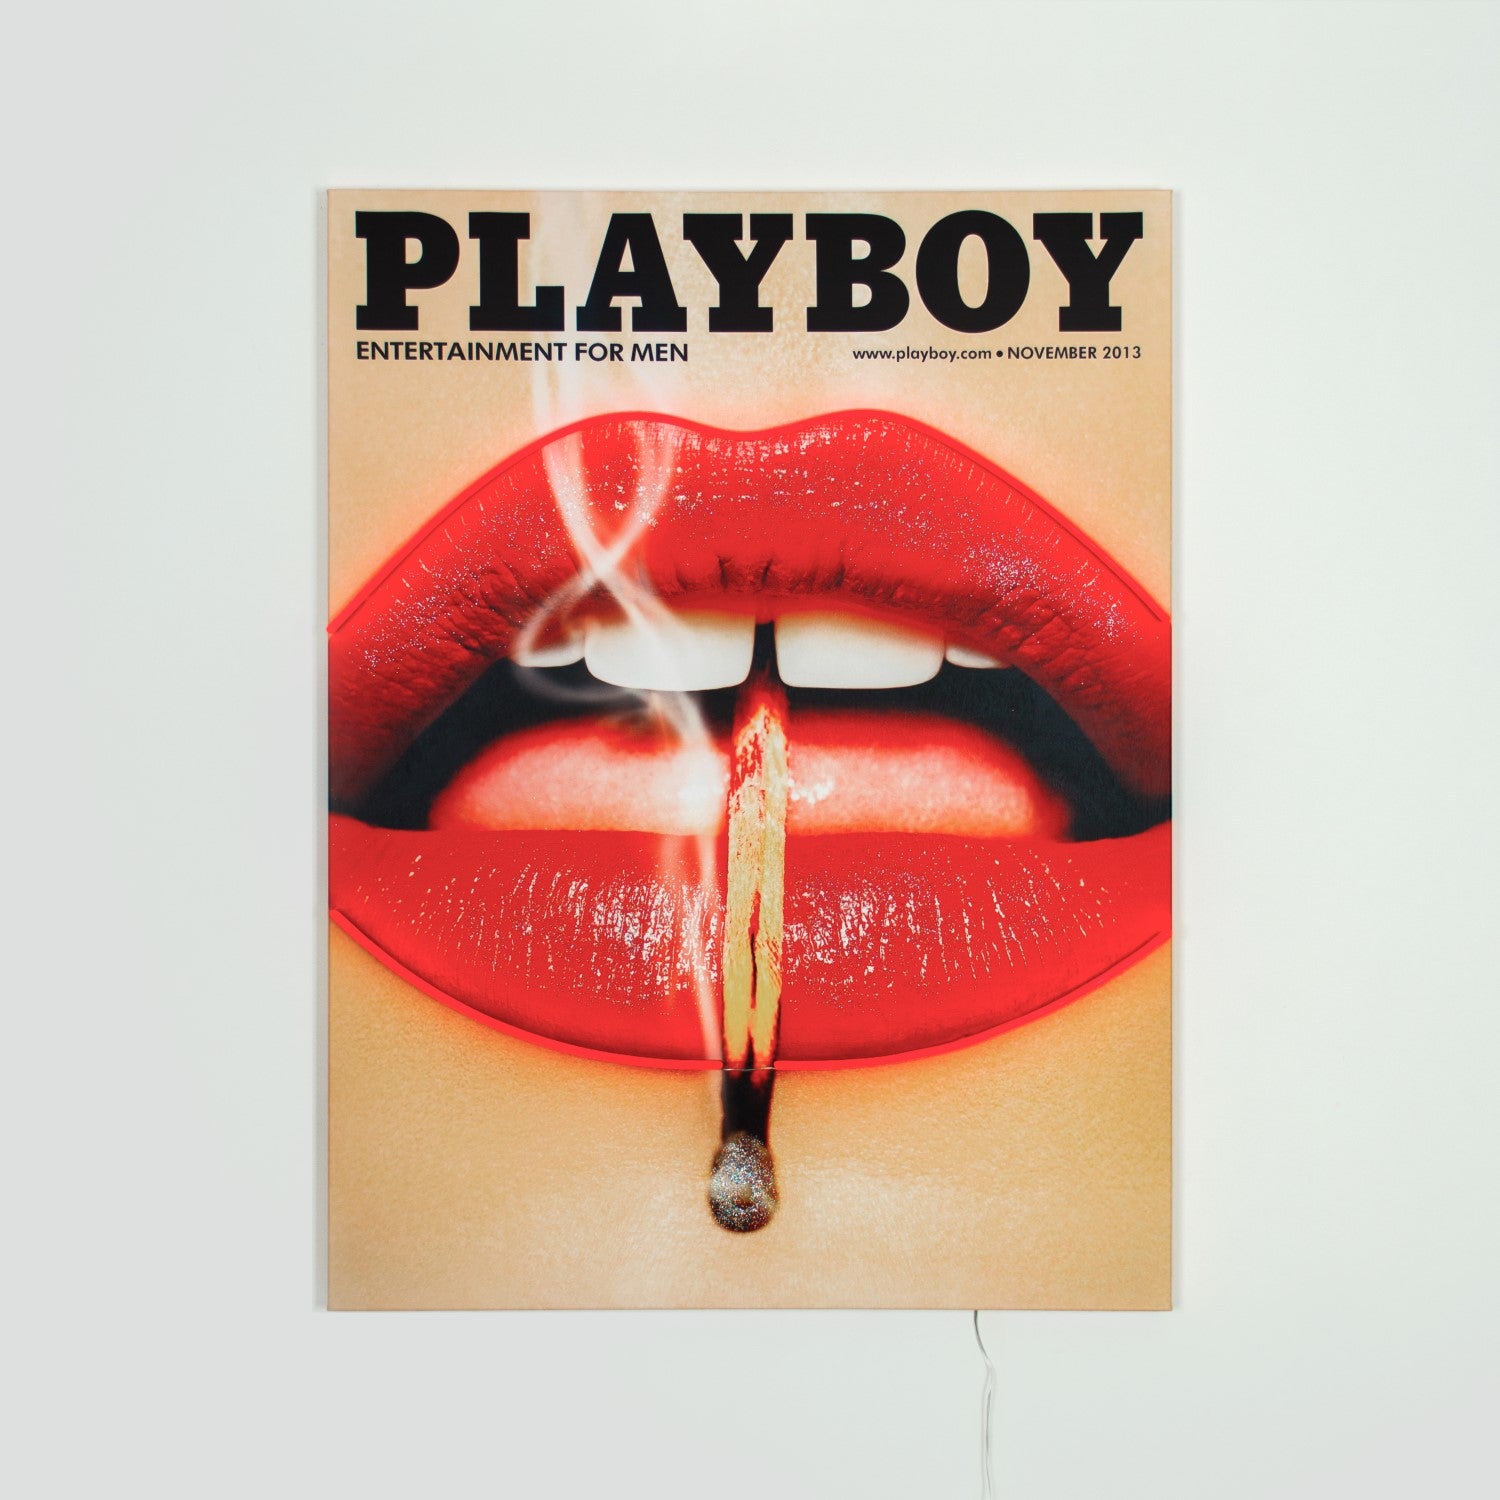 "Match Cover" LED Neon Playboy Edition